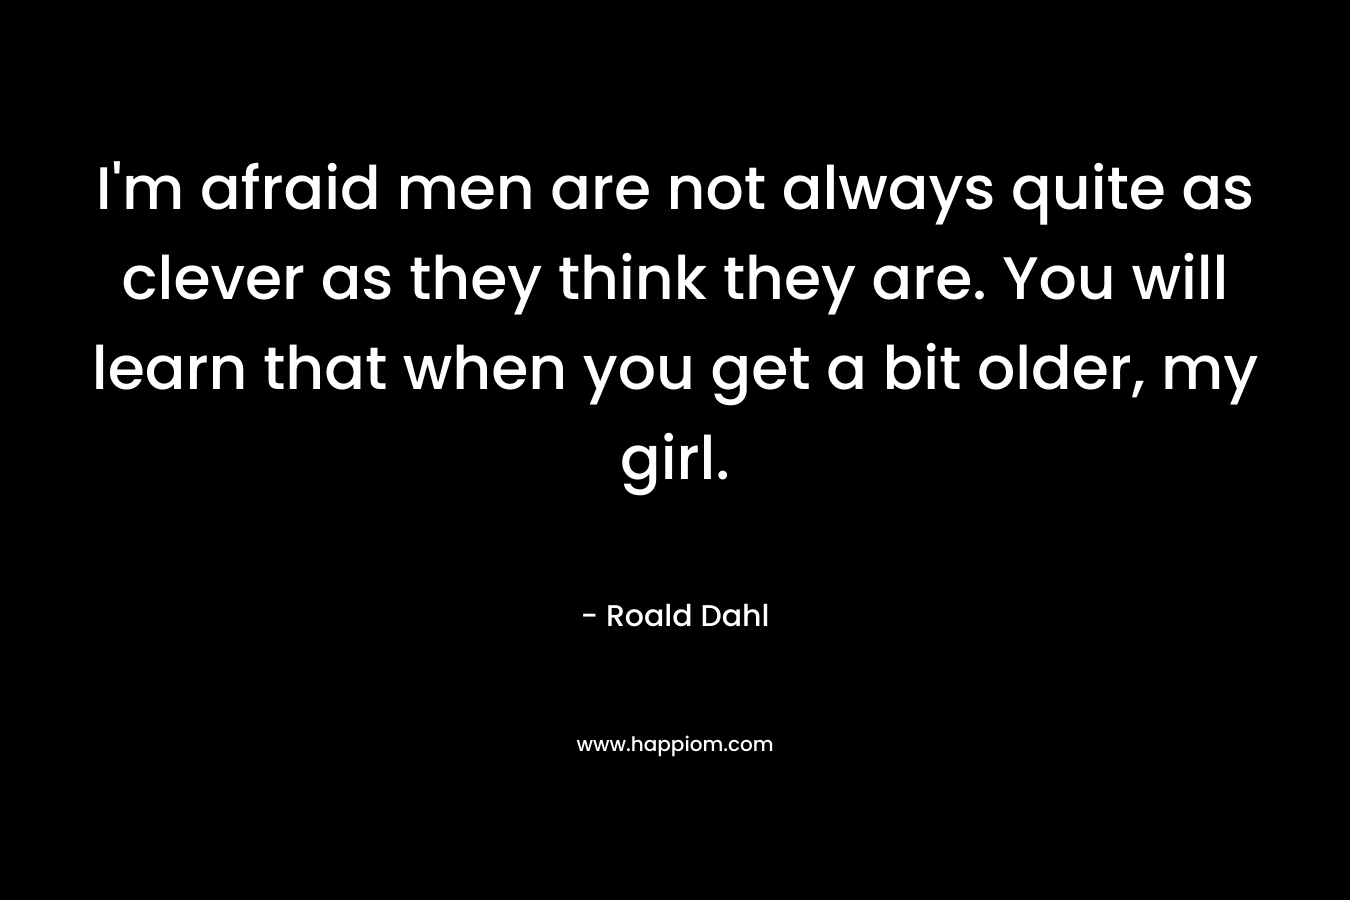 I’m afraid men are not always quite as clever as they think they are. You will learn that when you get a bit older, my girl. – Roald Dahl